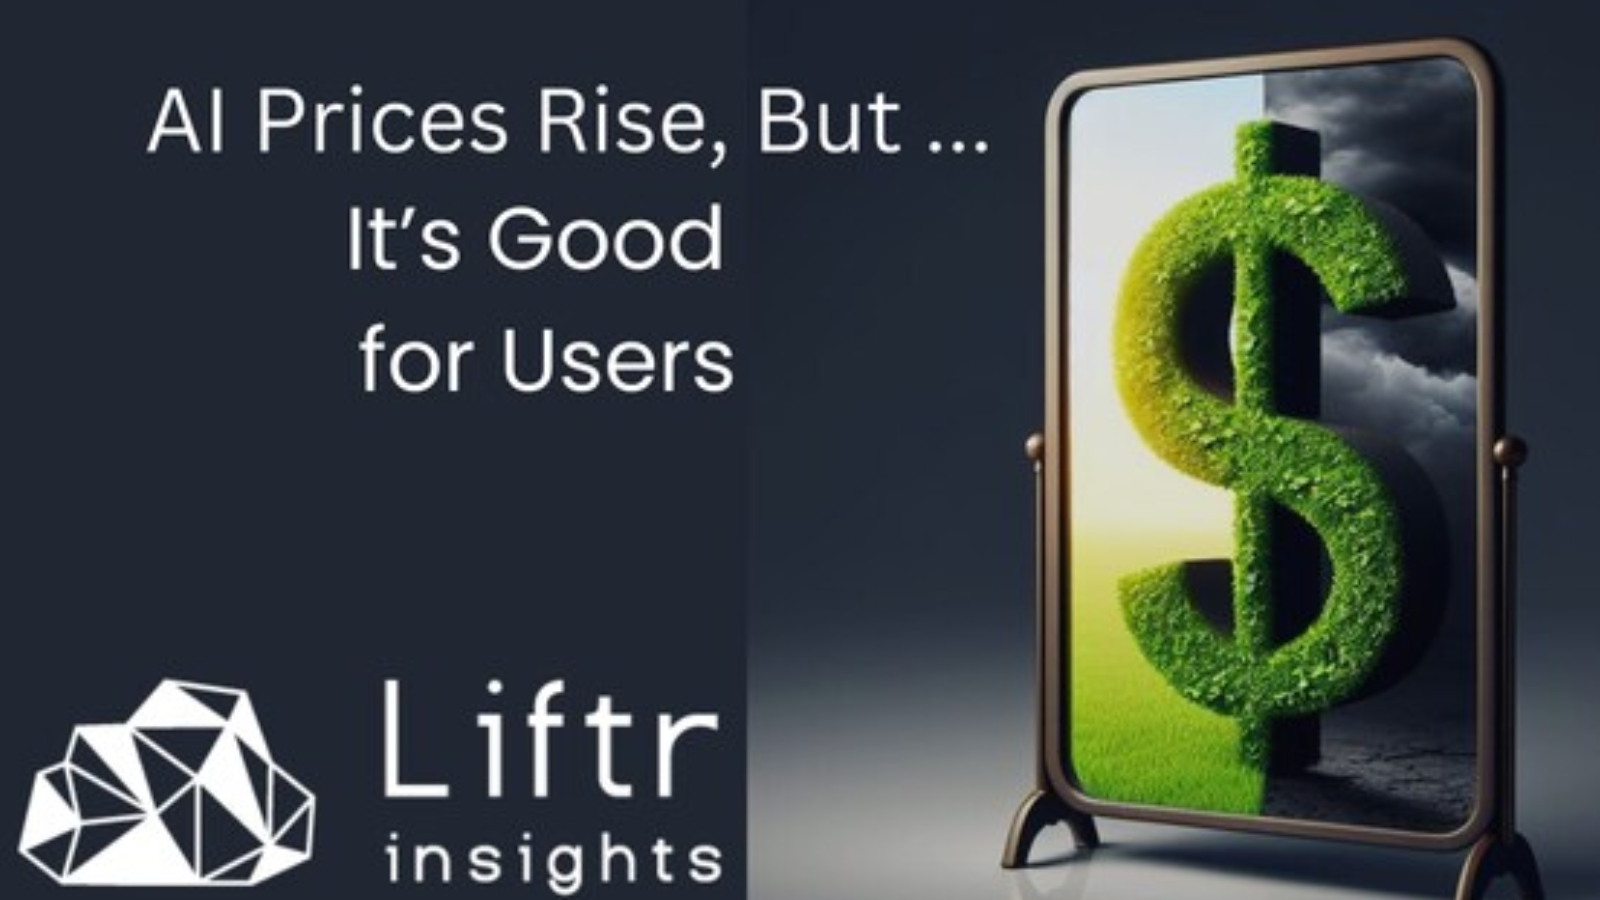 Liftr Insights data show how increasing prices can be misleading corporate analysts